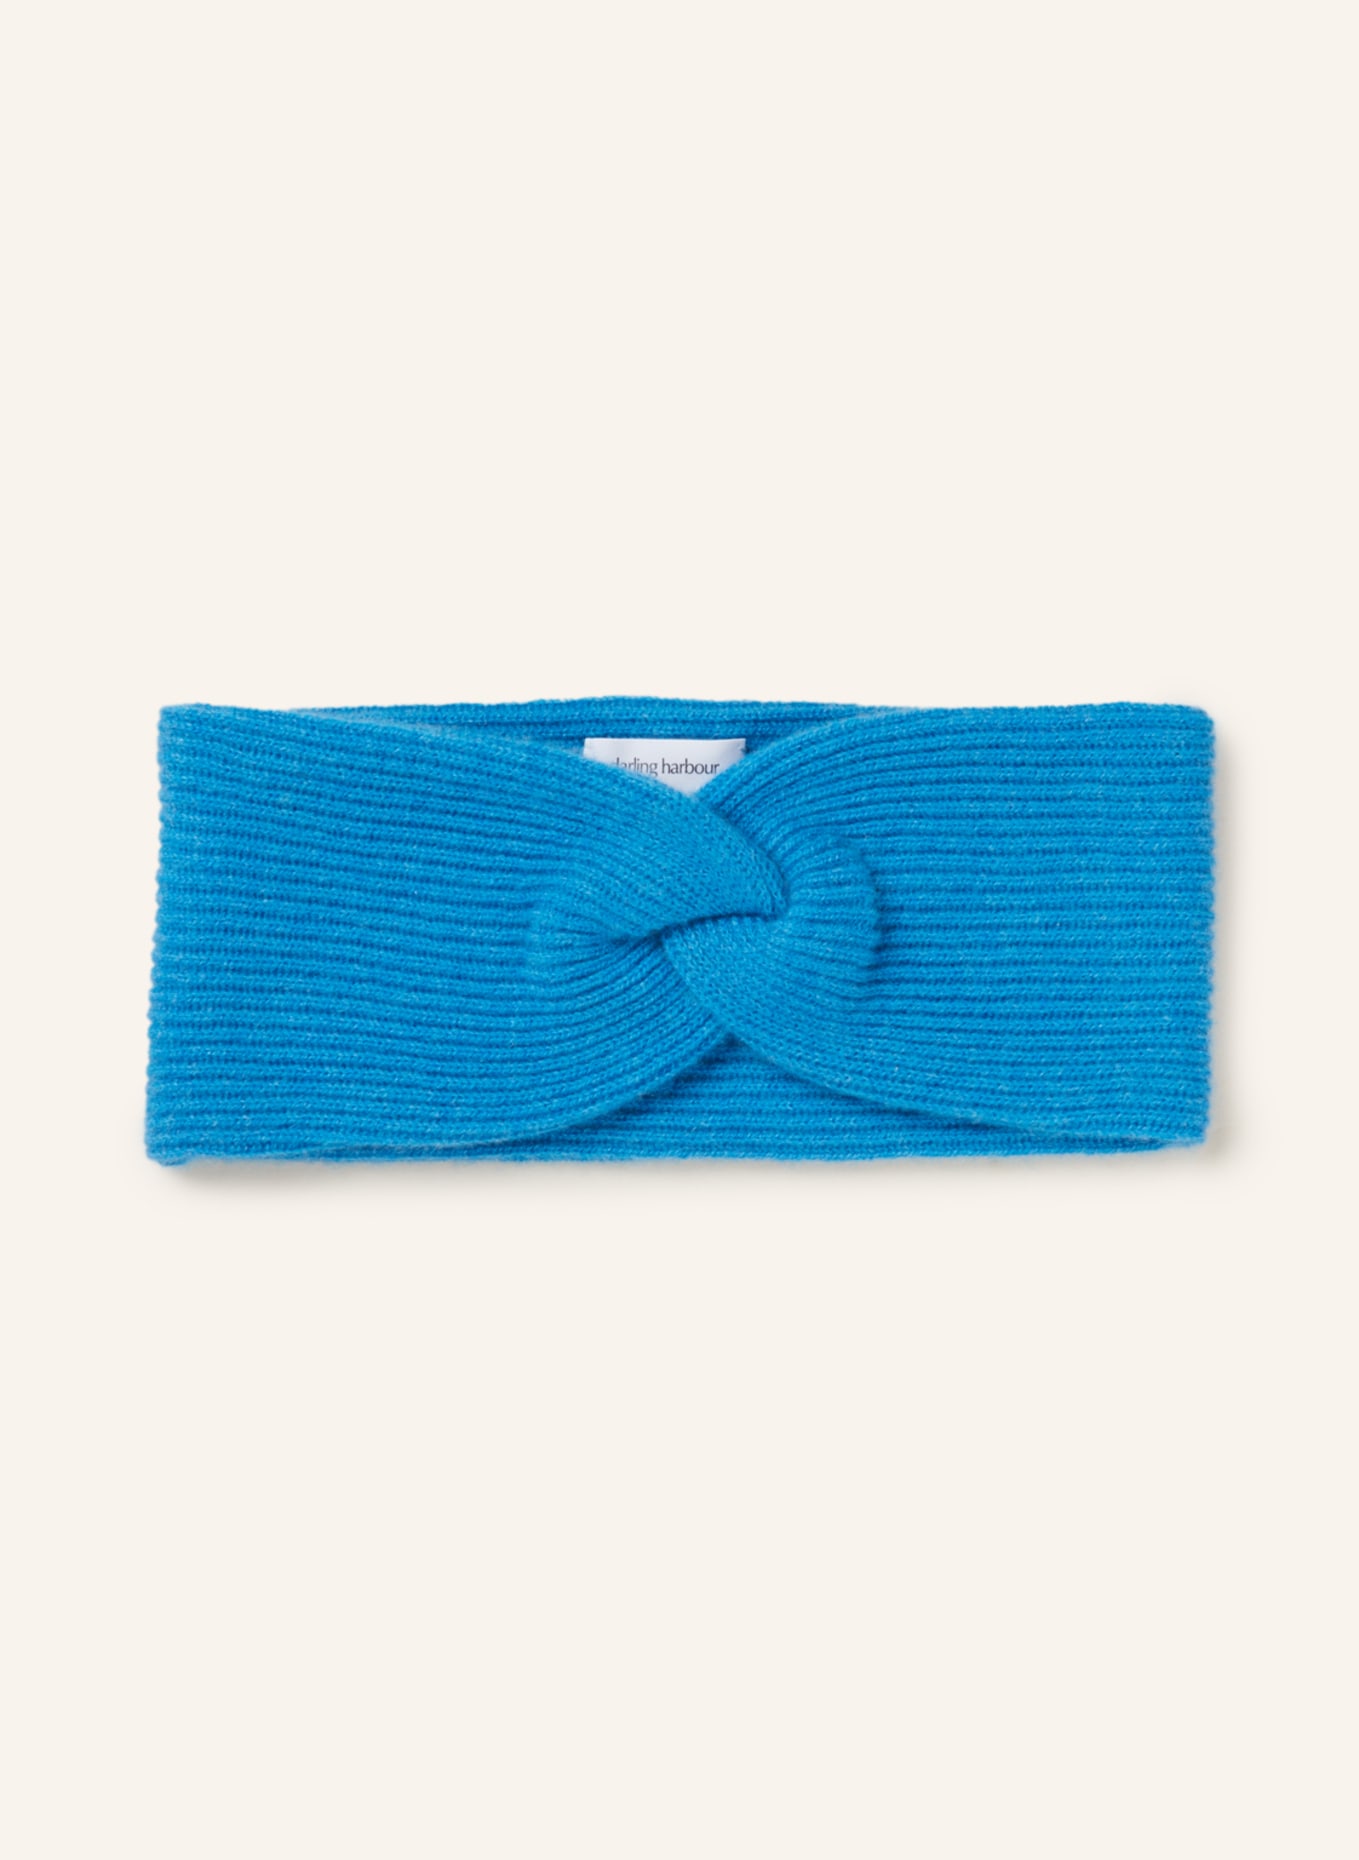 darling harbour Headband in cashmere, Color: TURQUOISE (Image 1)